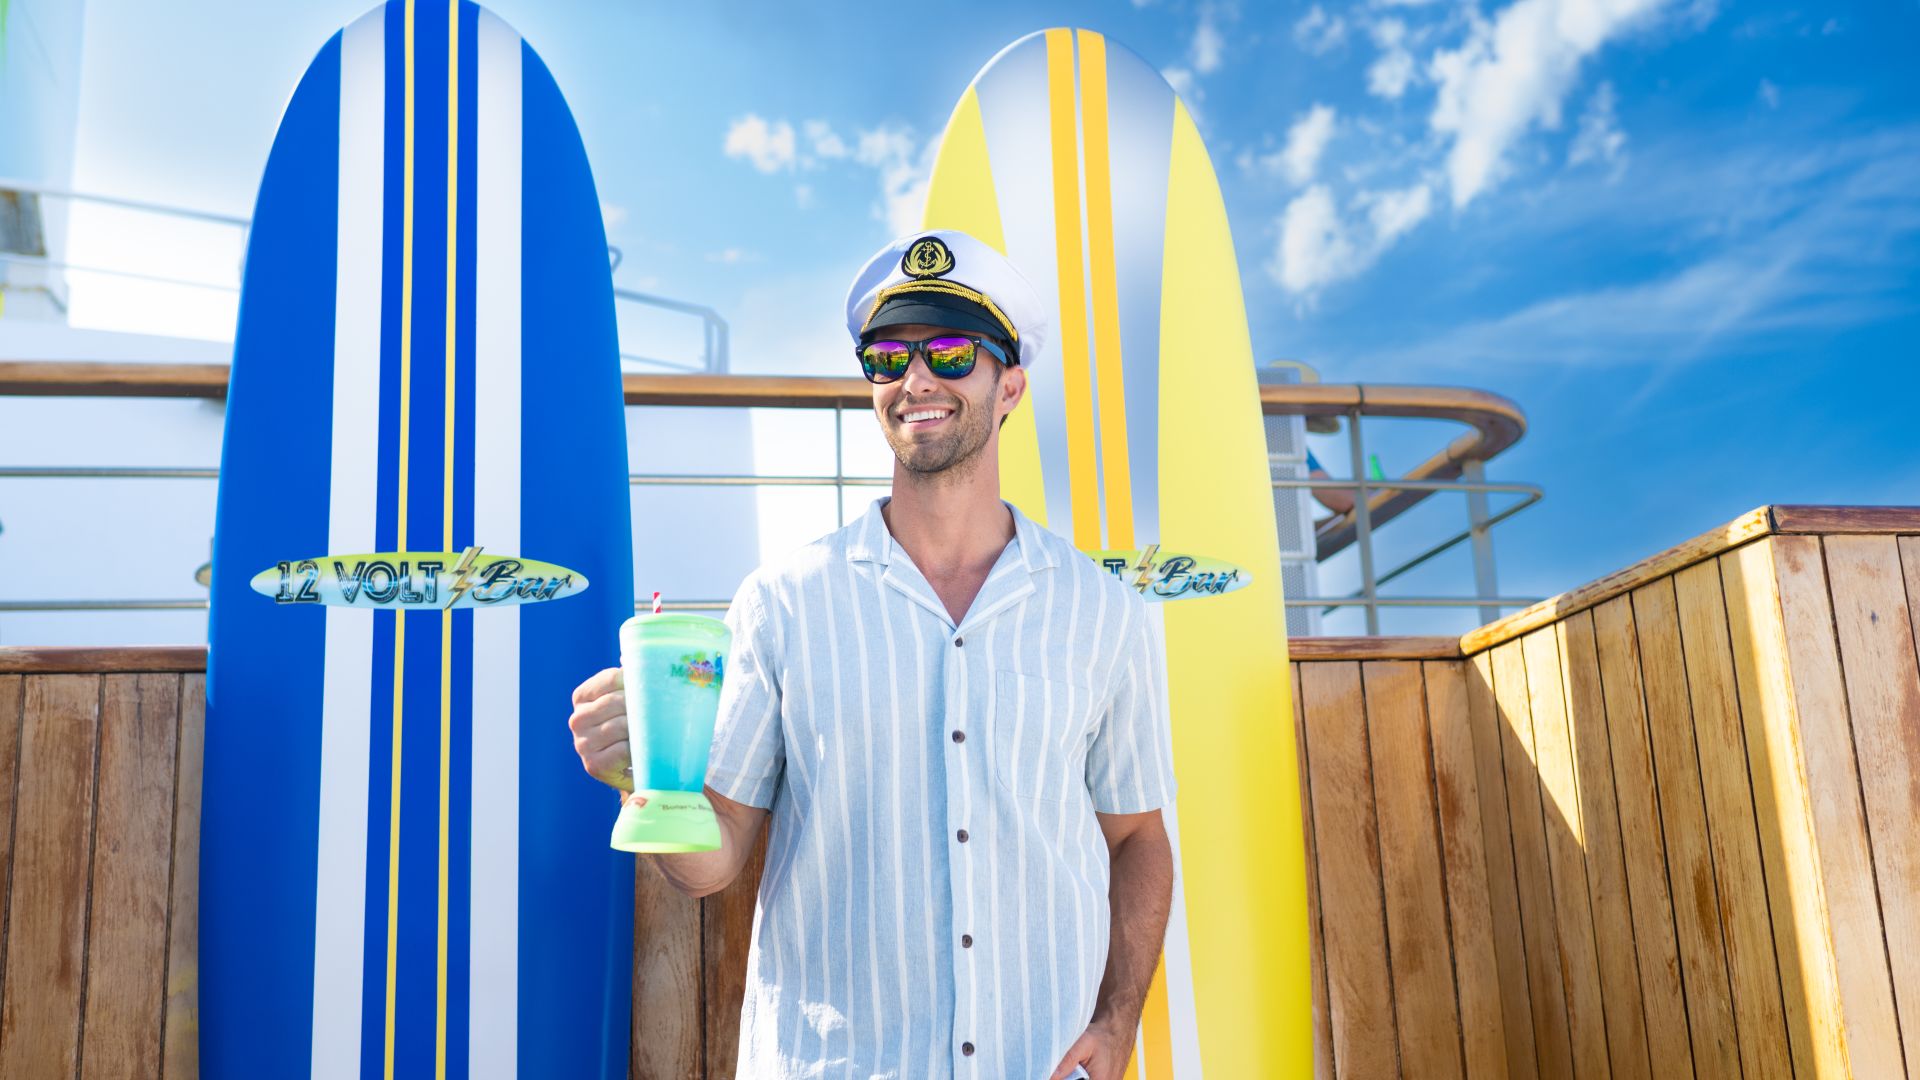 A Man Holding A Drink And Standing Next To Surfboards